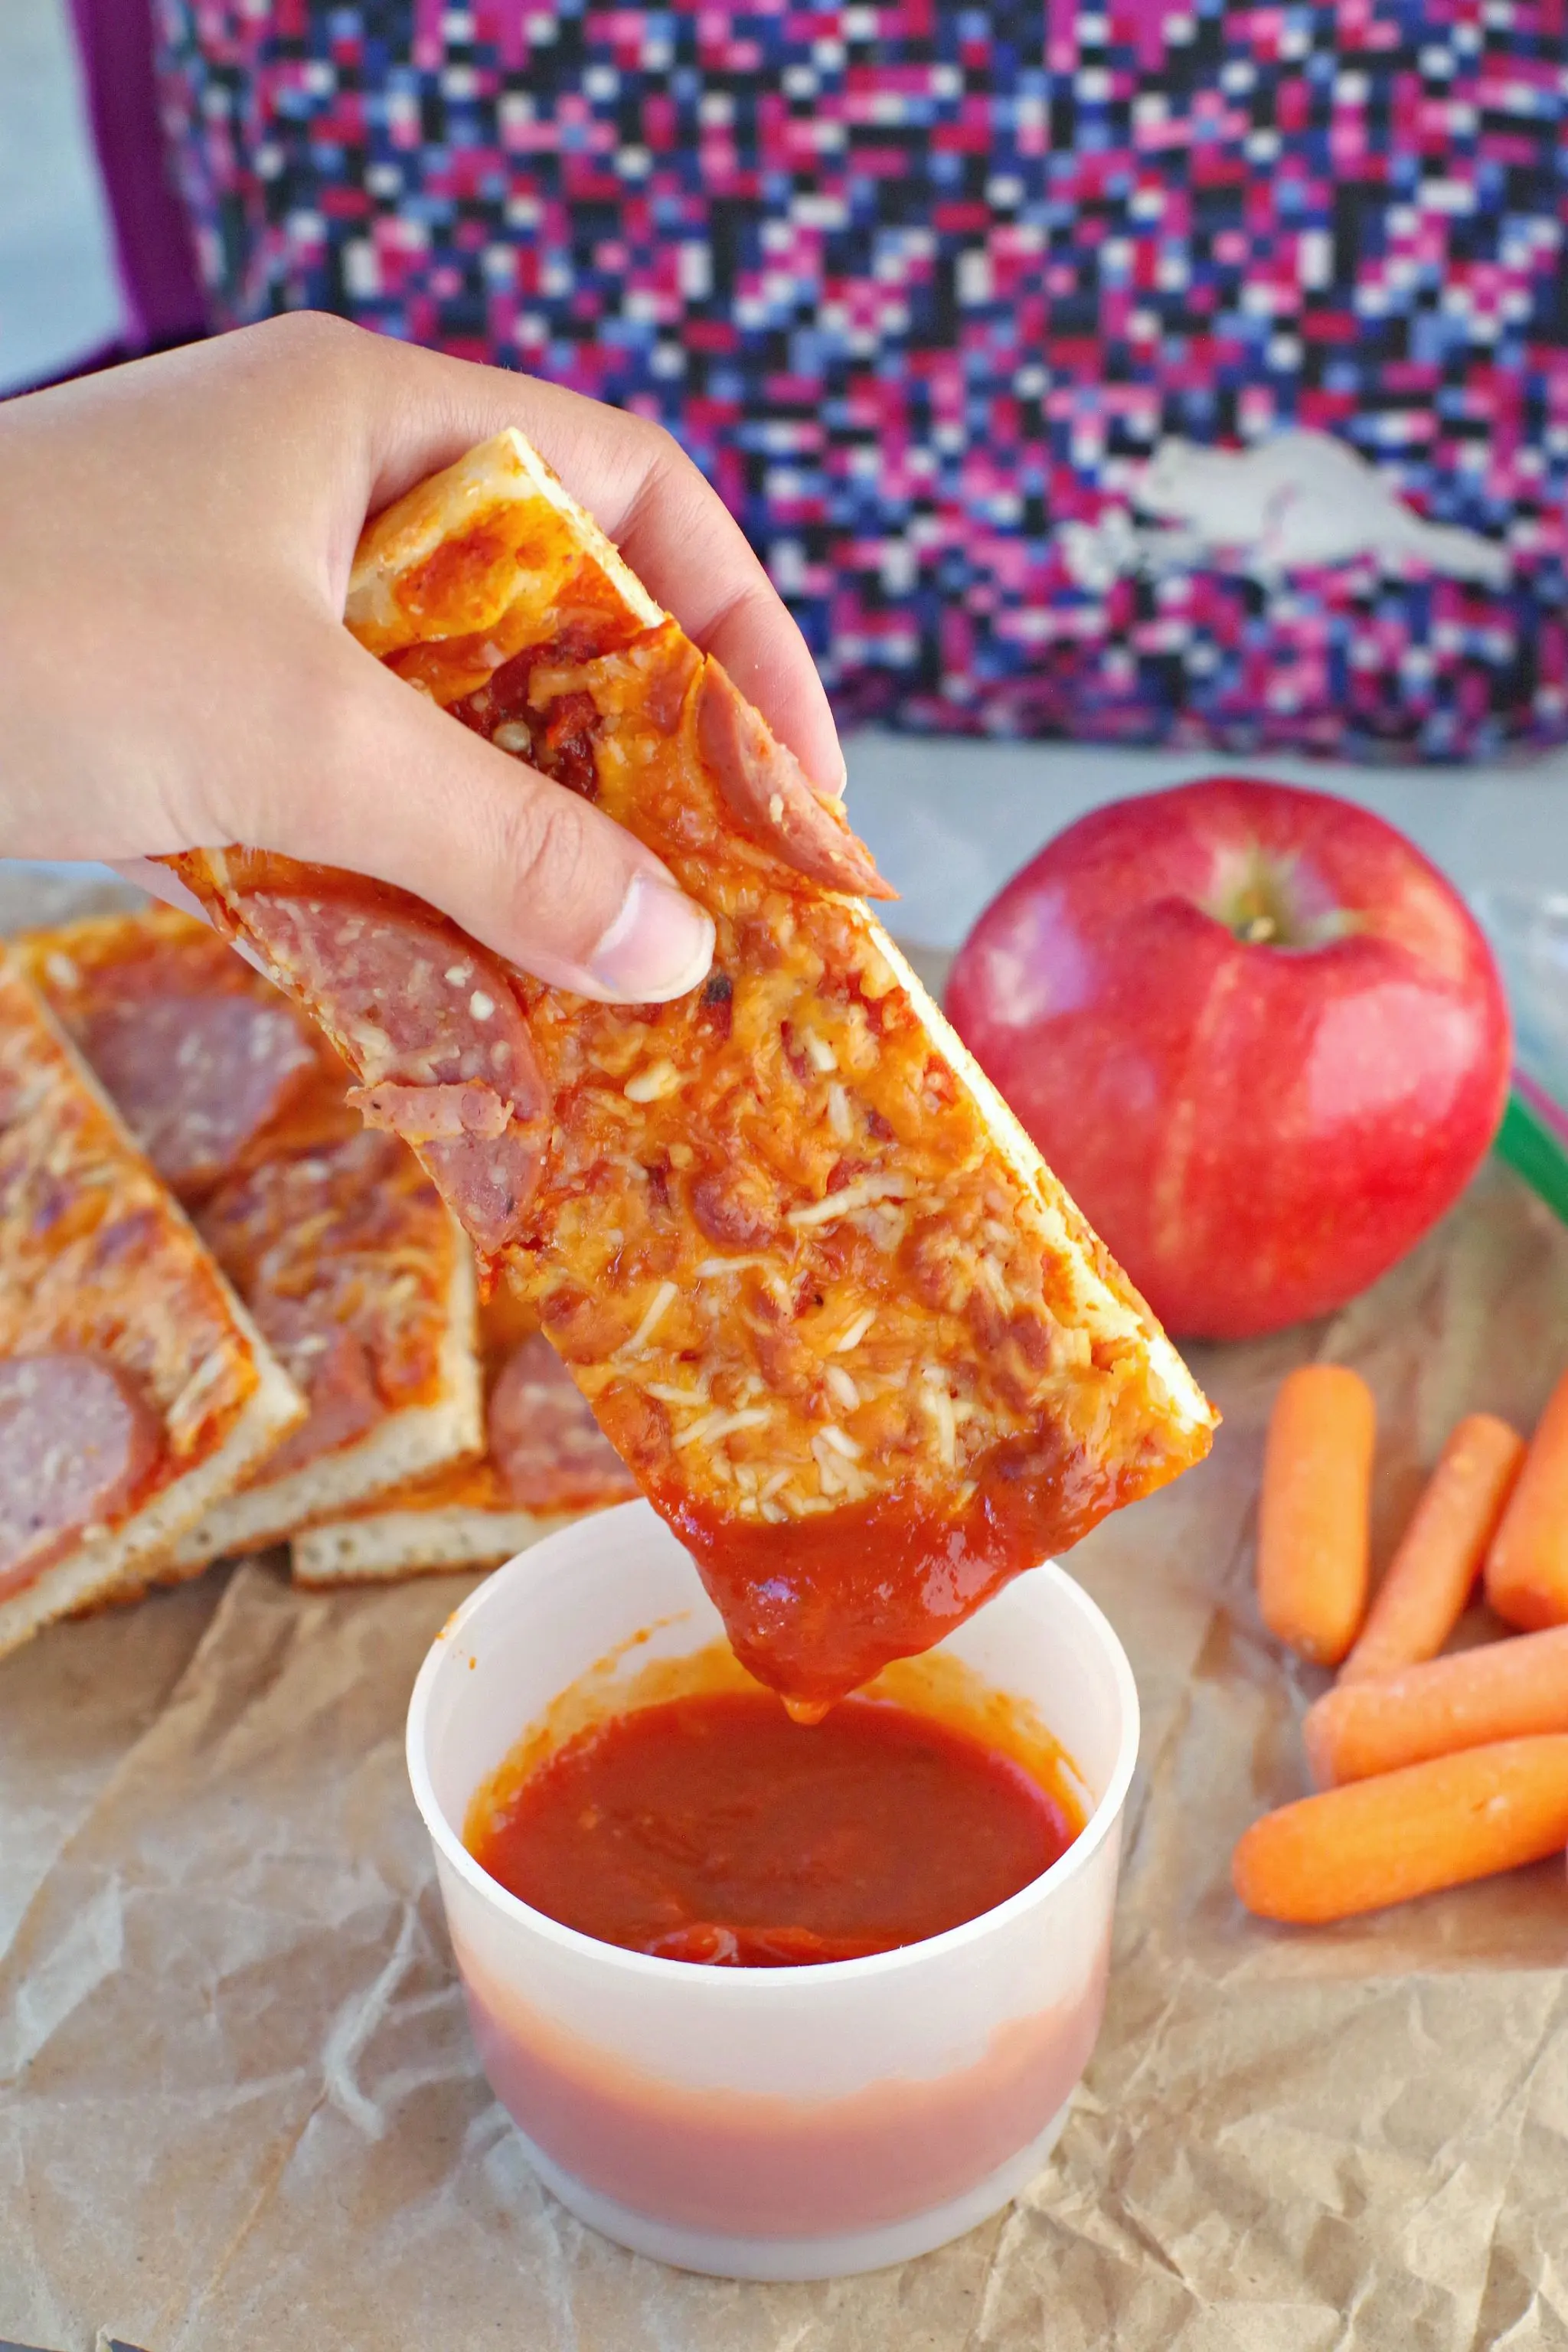 pizza dipper being dipped into pizza sauce with pieces, an apple, carrots and lunch bag in background.